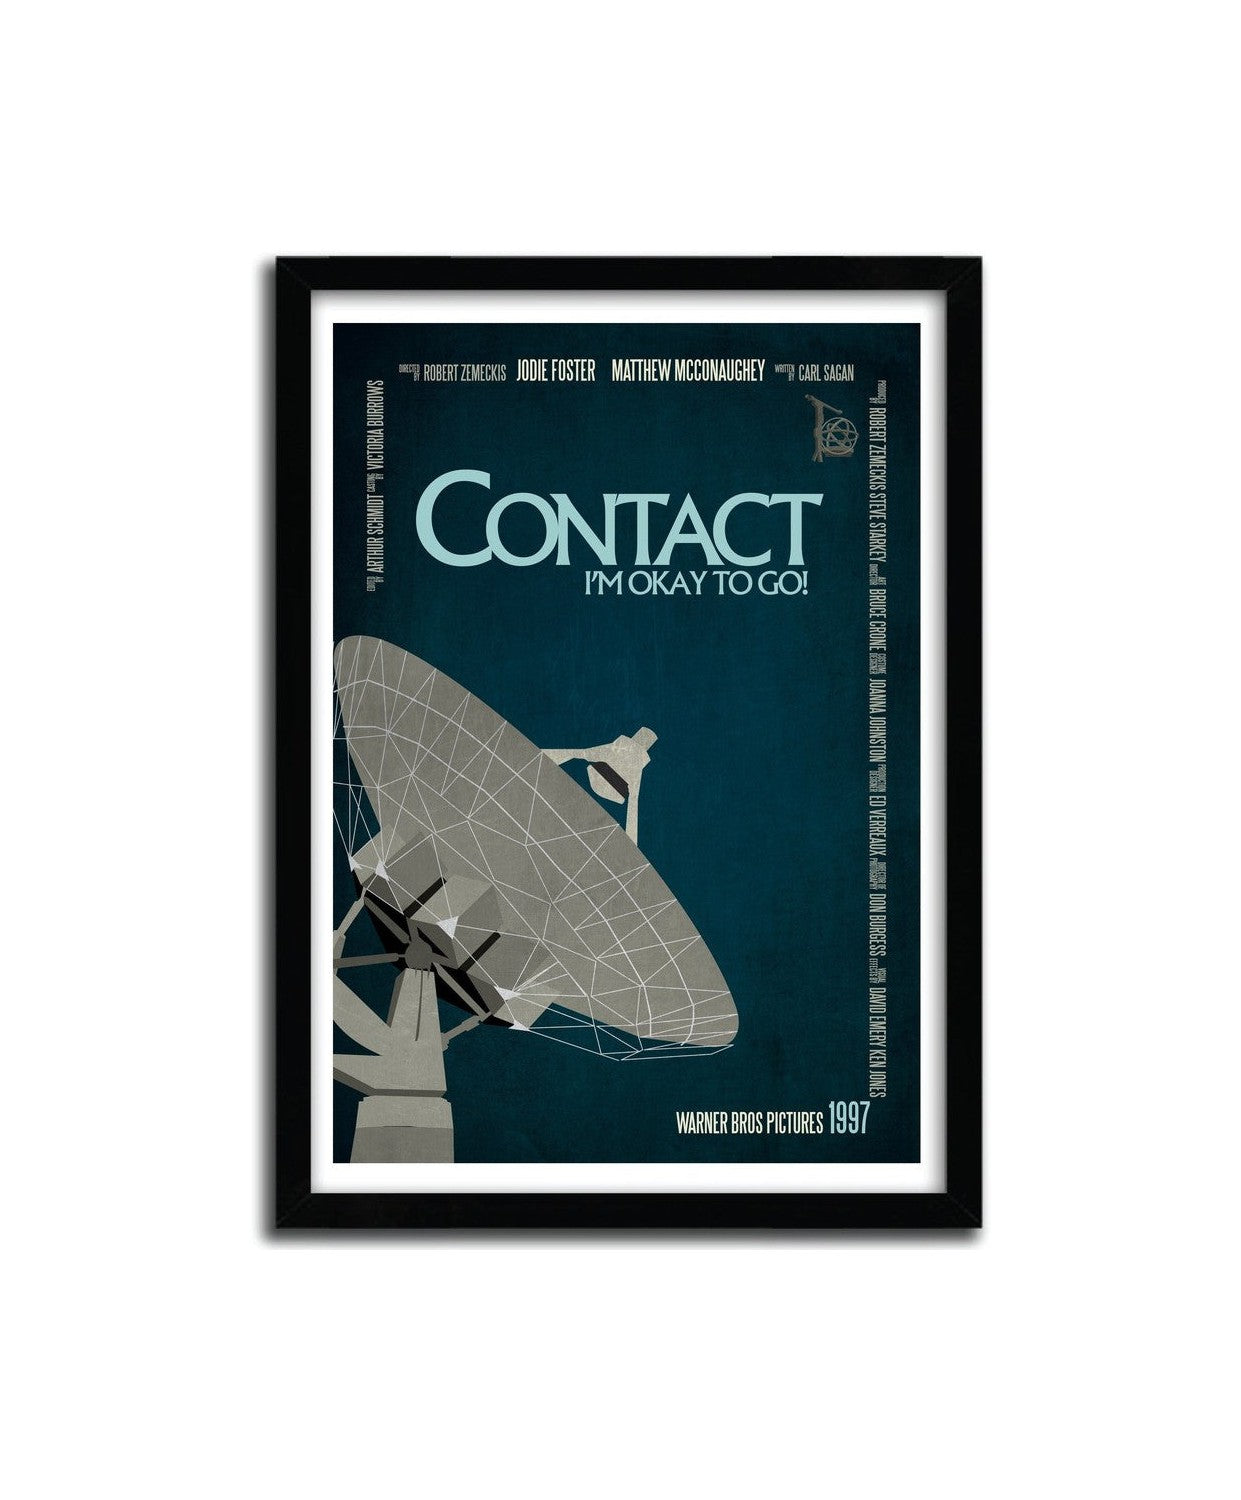 Affiche CONTACT by AYCAN YILMAZ